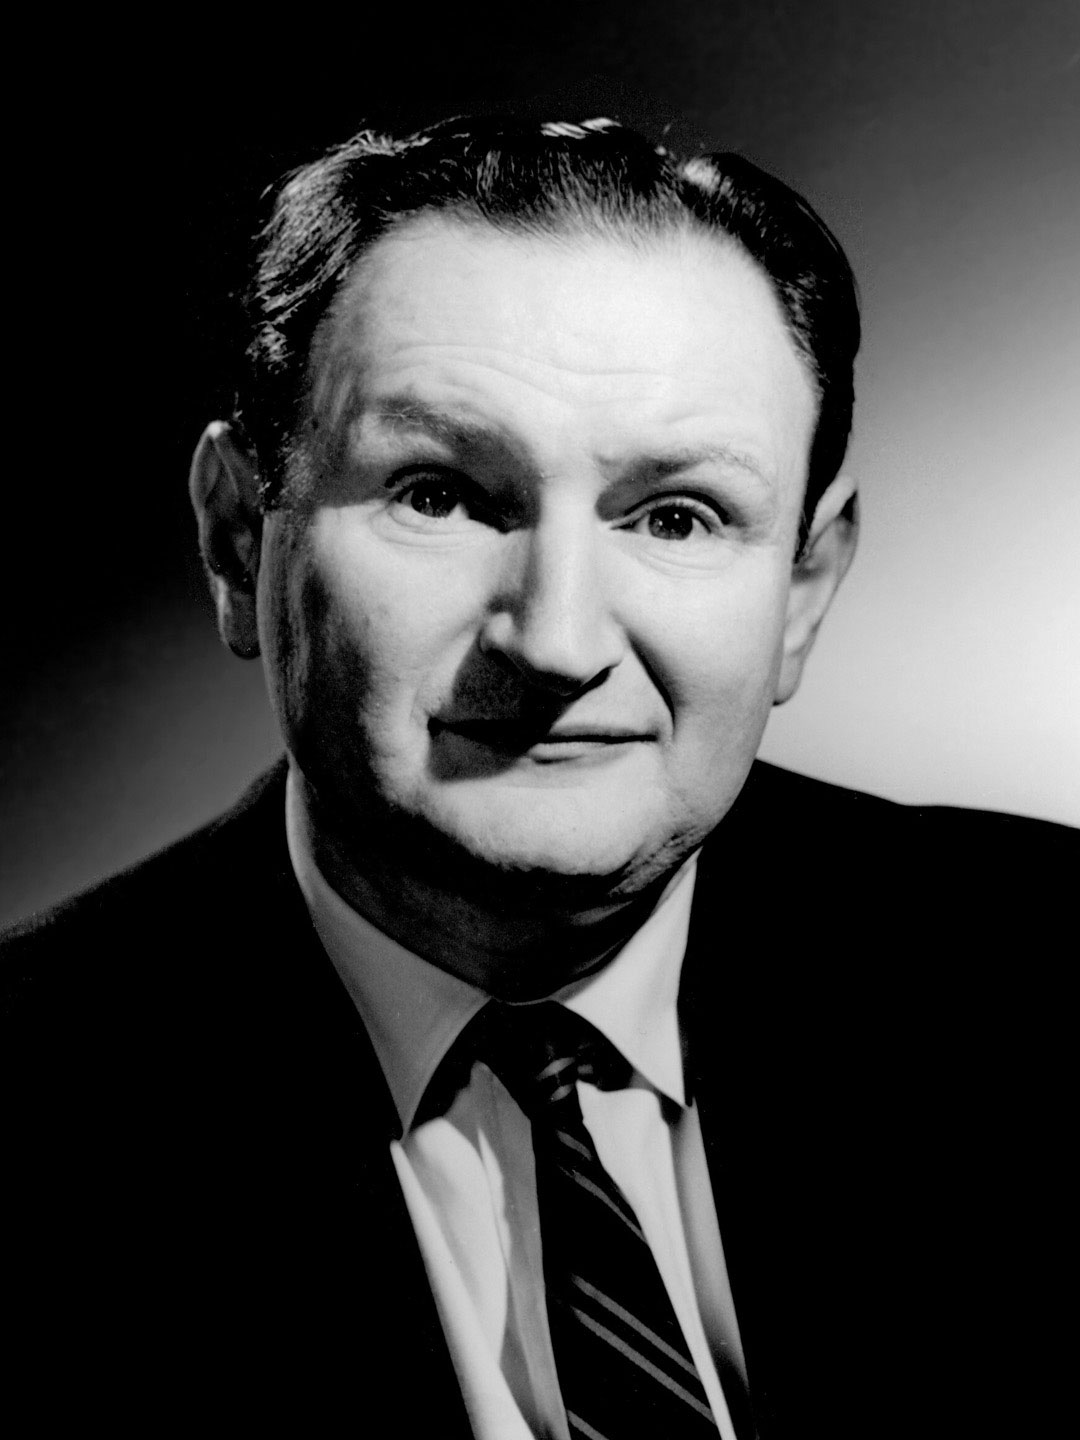 How tall is Al Lewis?